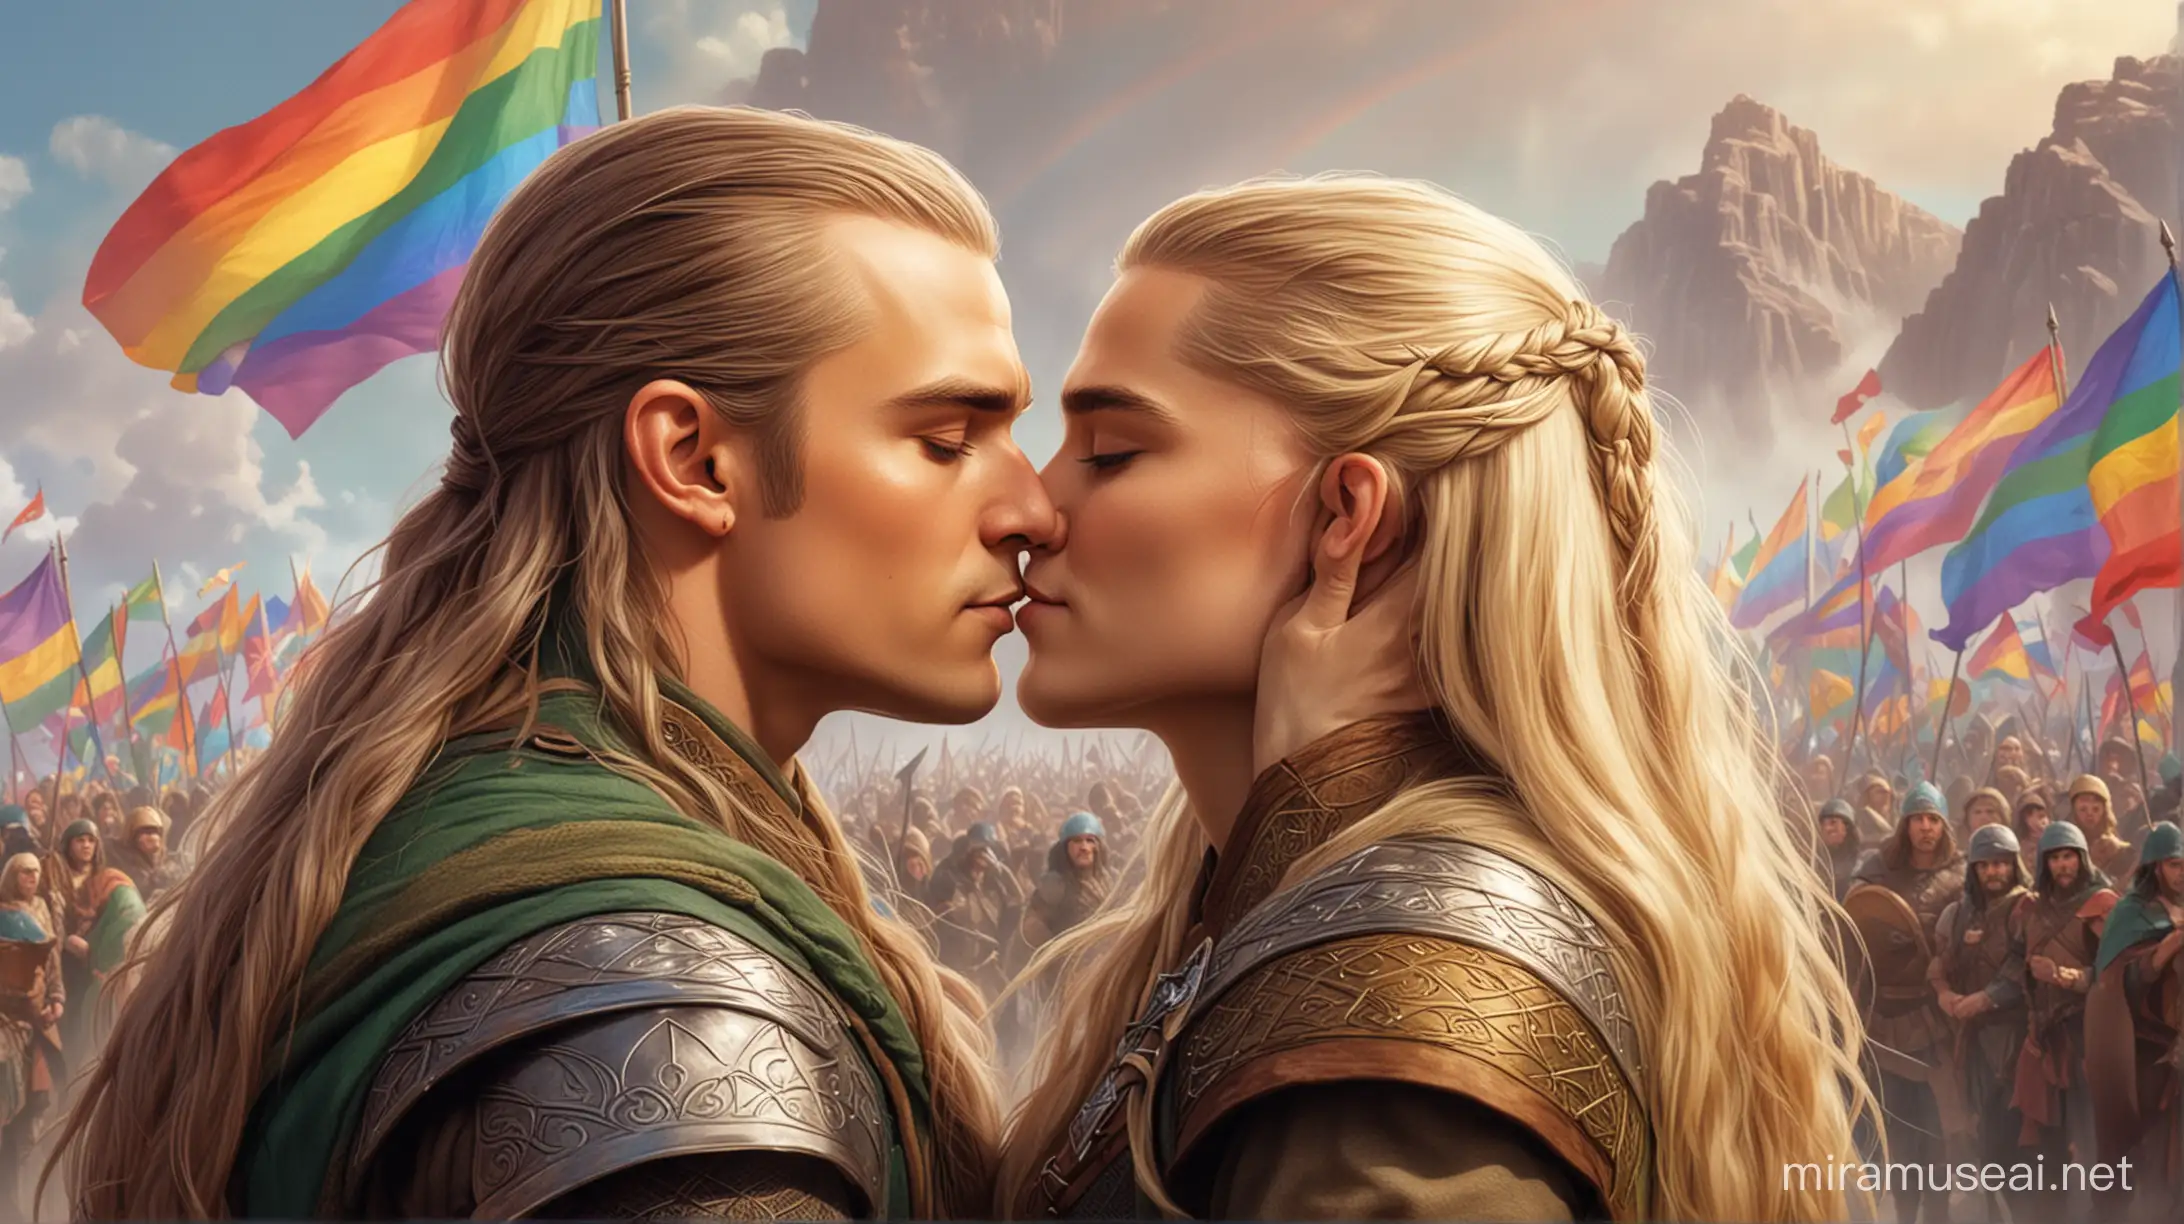 Fantasy Romance Legolas and Gimli Share a Kiss with LGBT Army in the Background